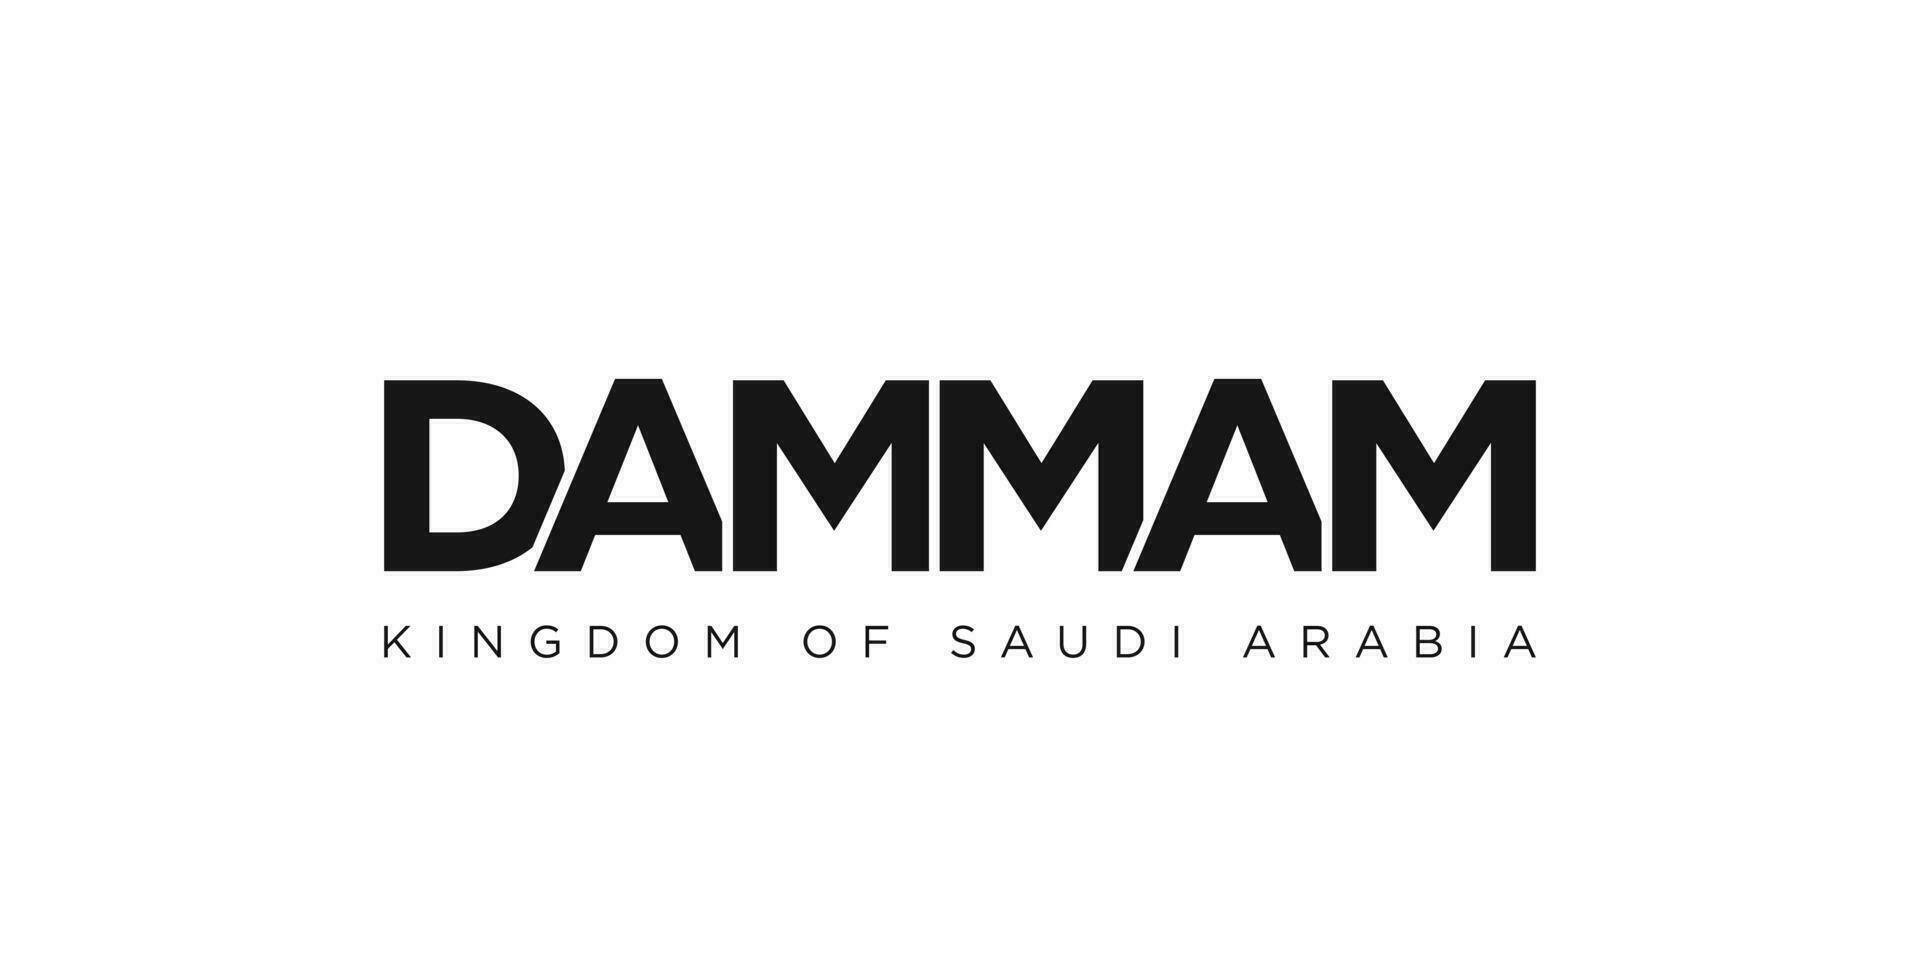 Dammam in the Saudi Arabia emblem. The design features a geometric style, vector illustration with bold typography in a modern font. The graphic slogan lettering.